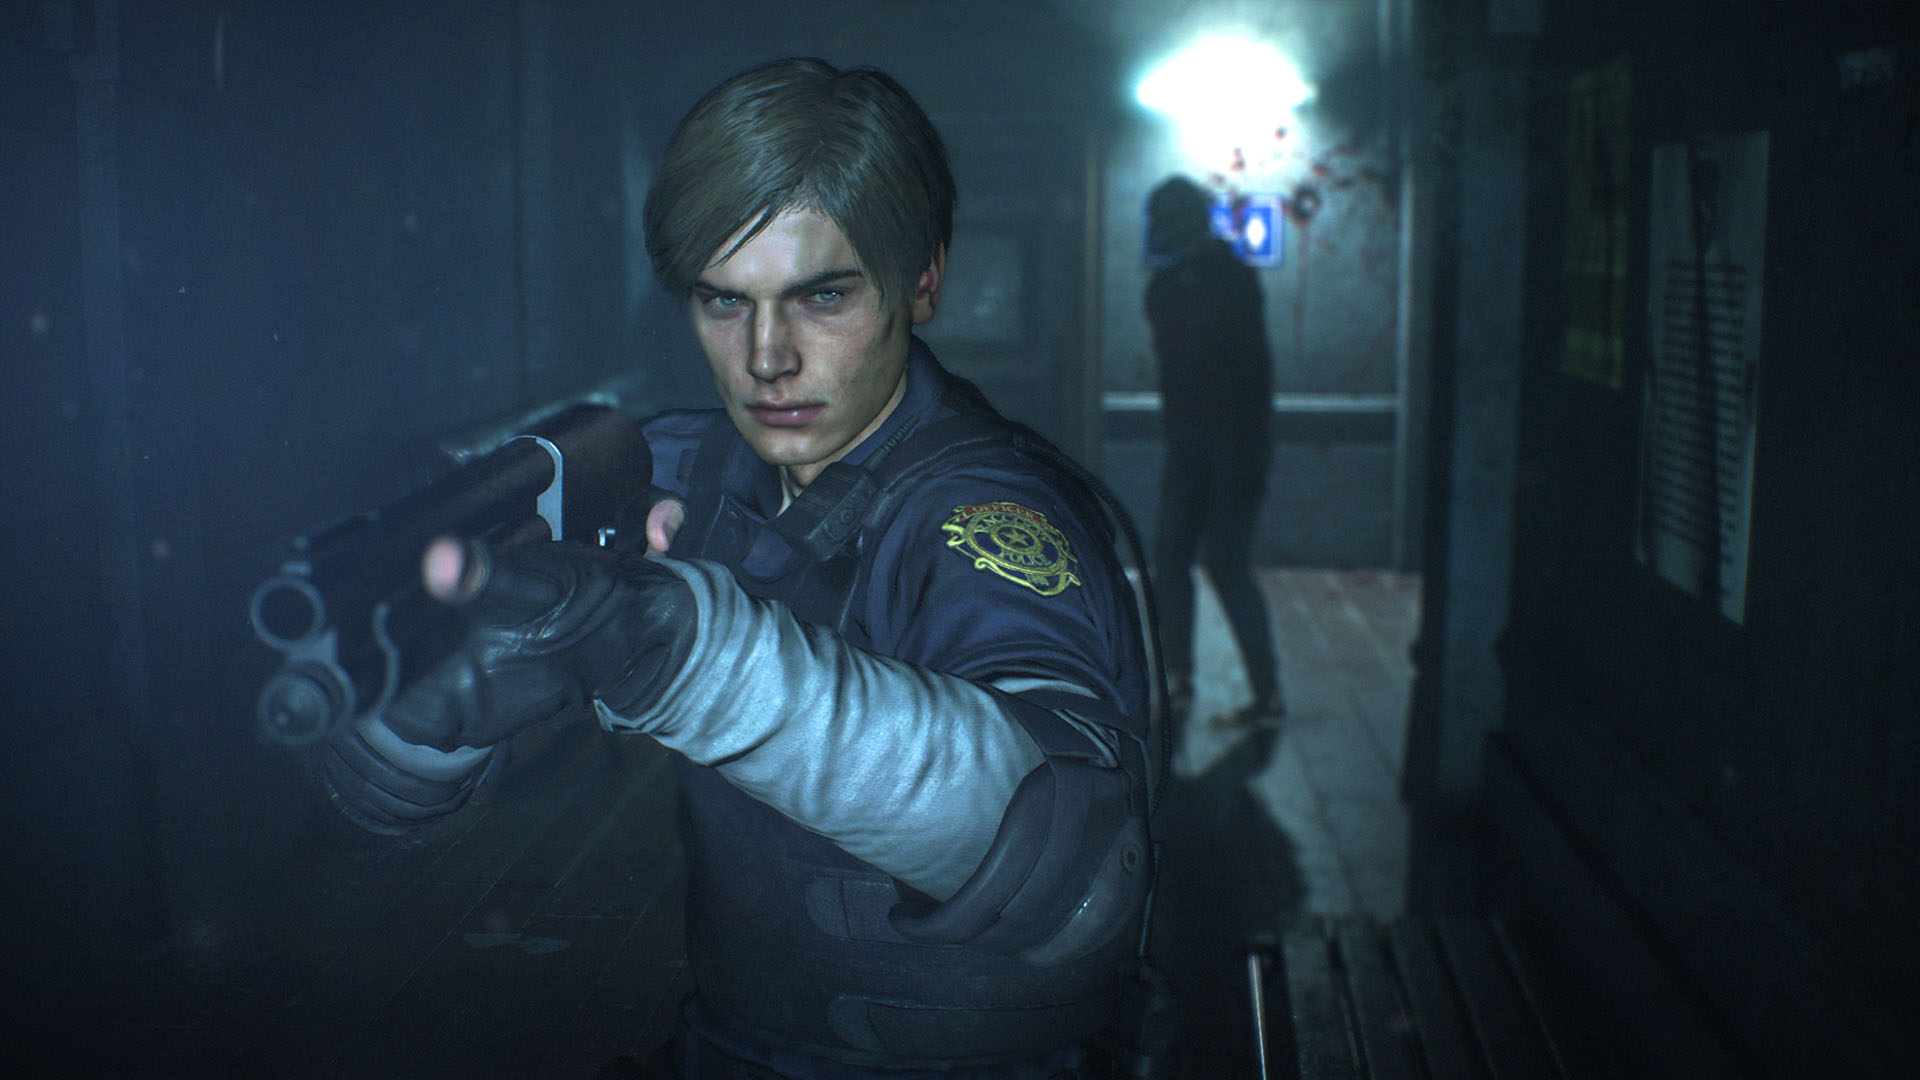 Classic Resident Evil 2 remade as an FPS game, available now